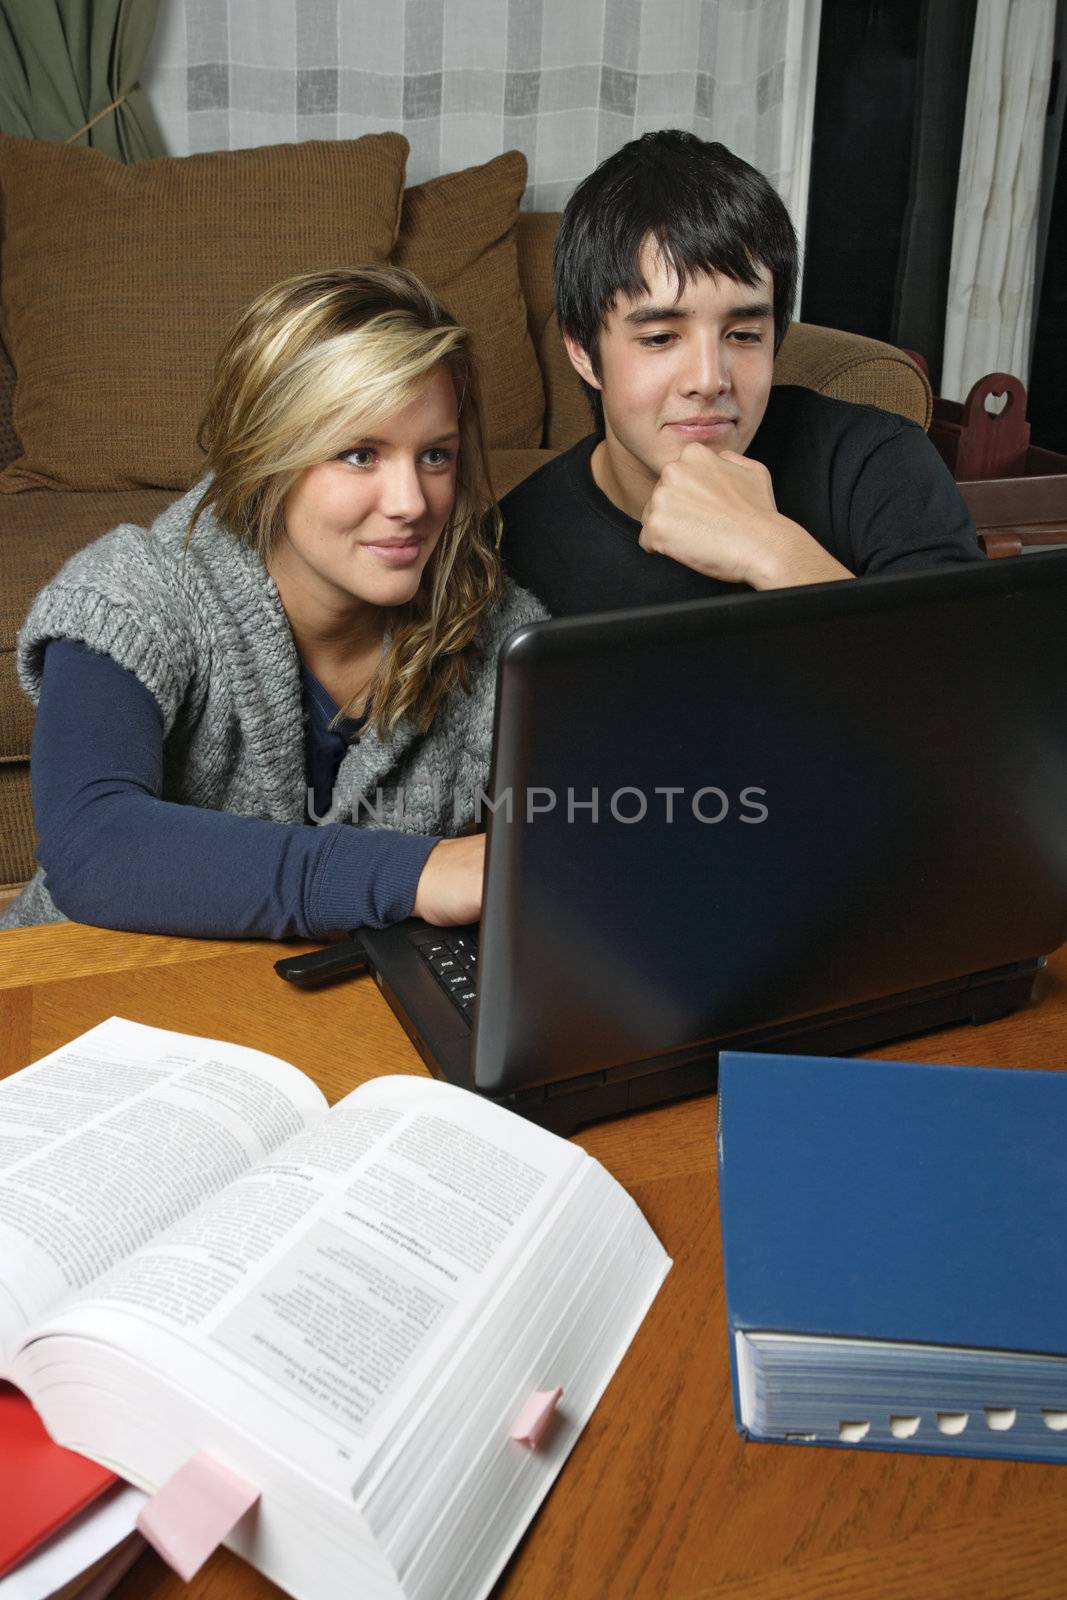 Students doing homework with laptop by sumners